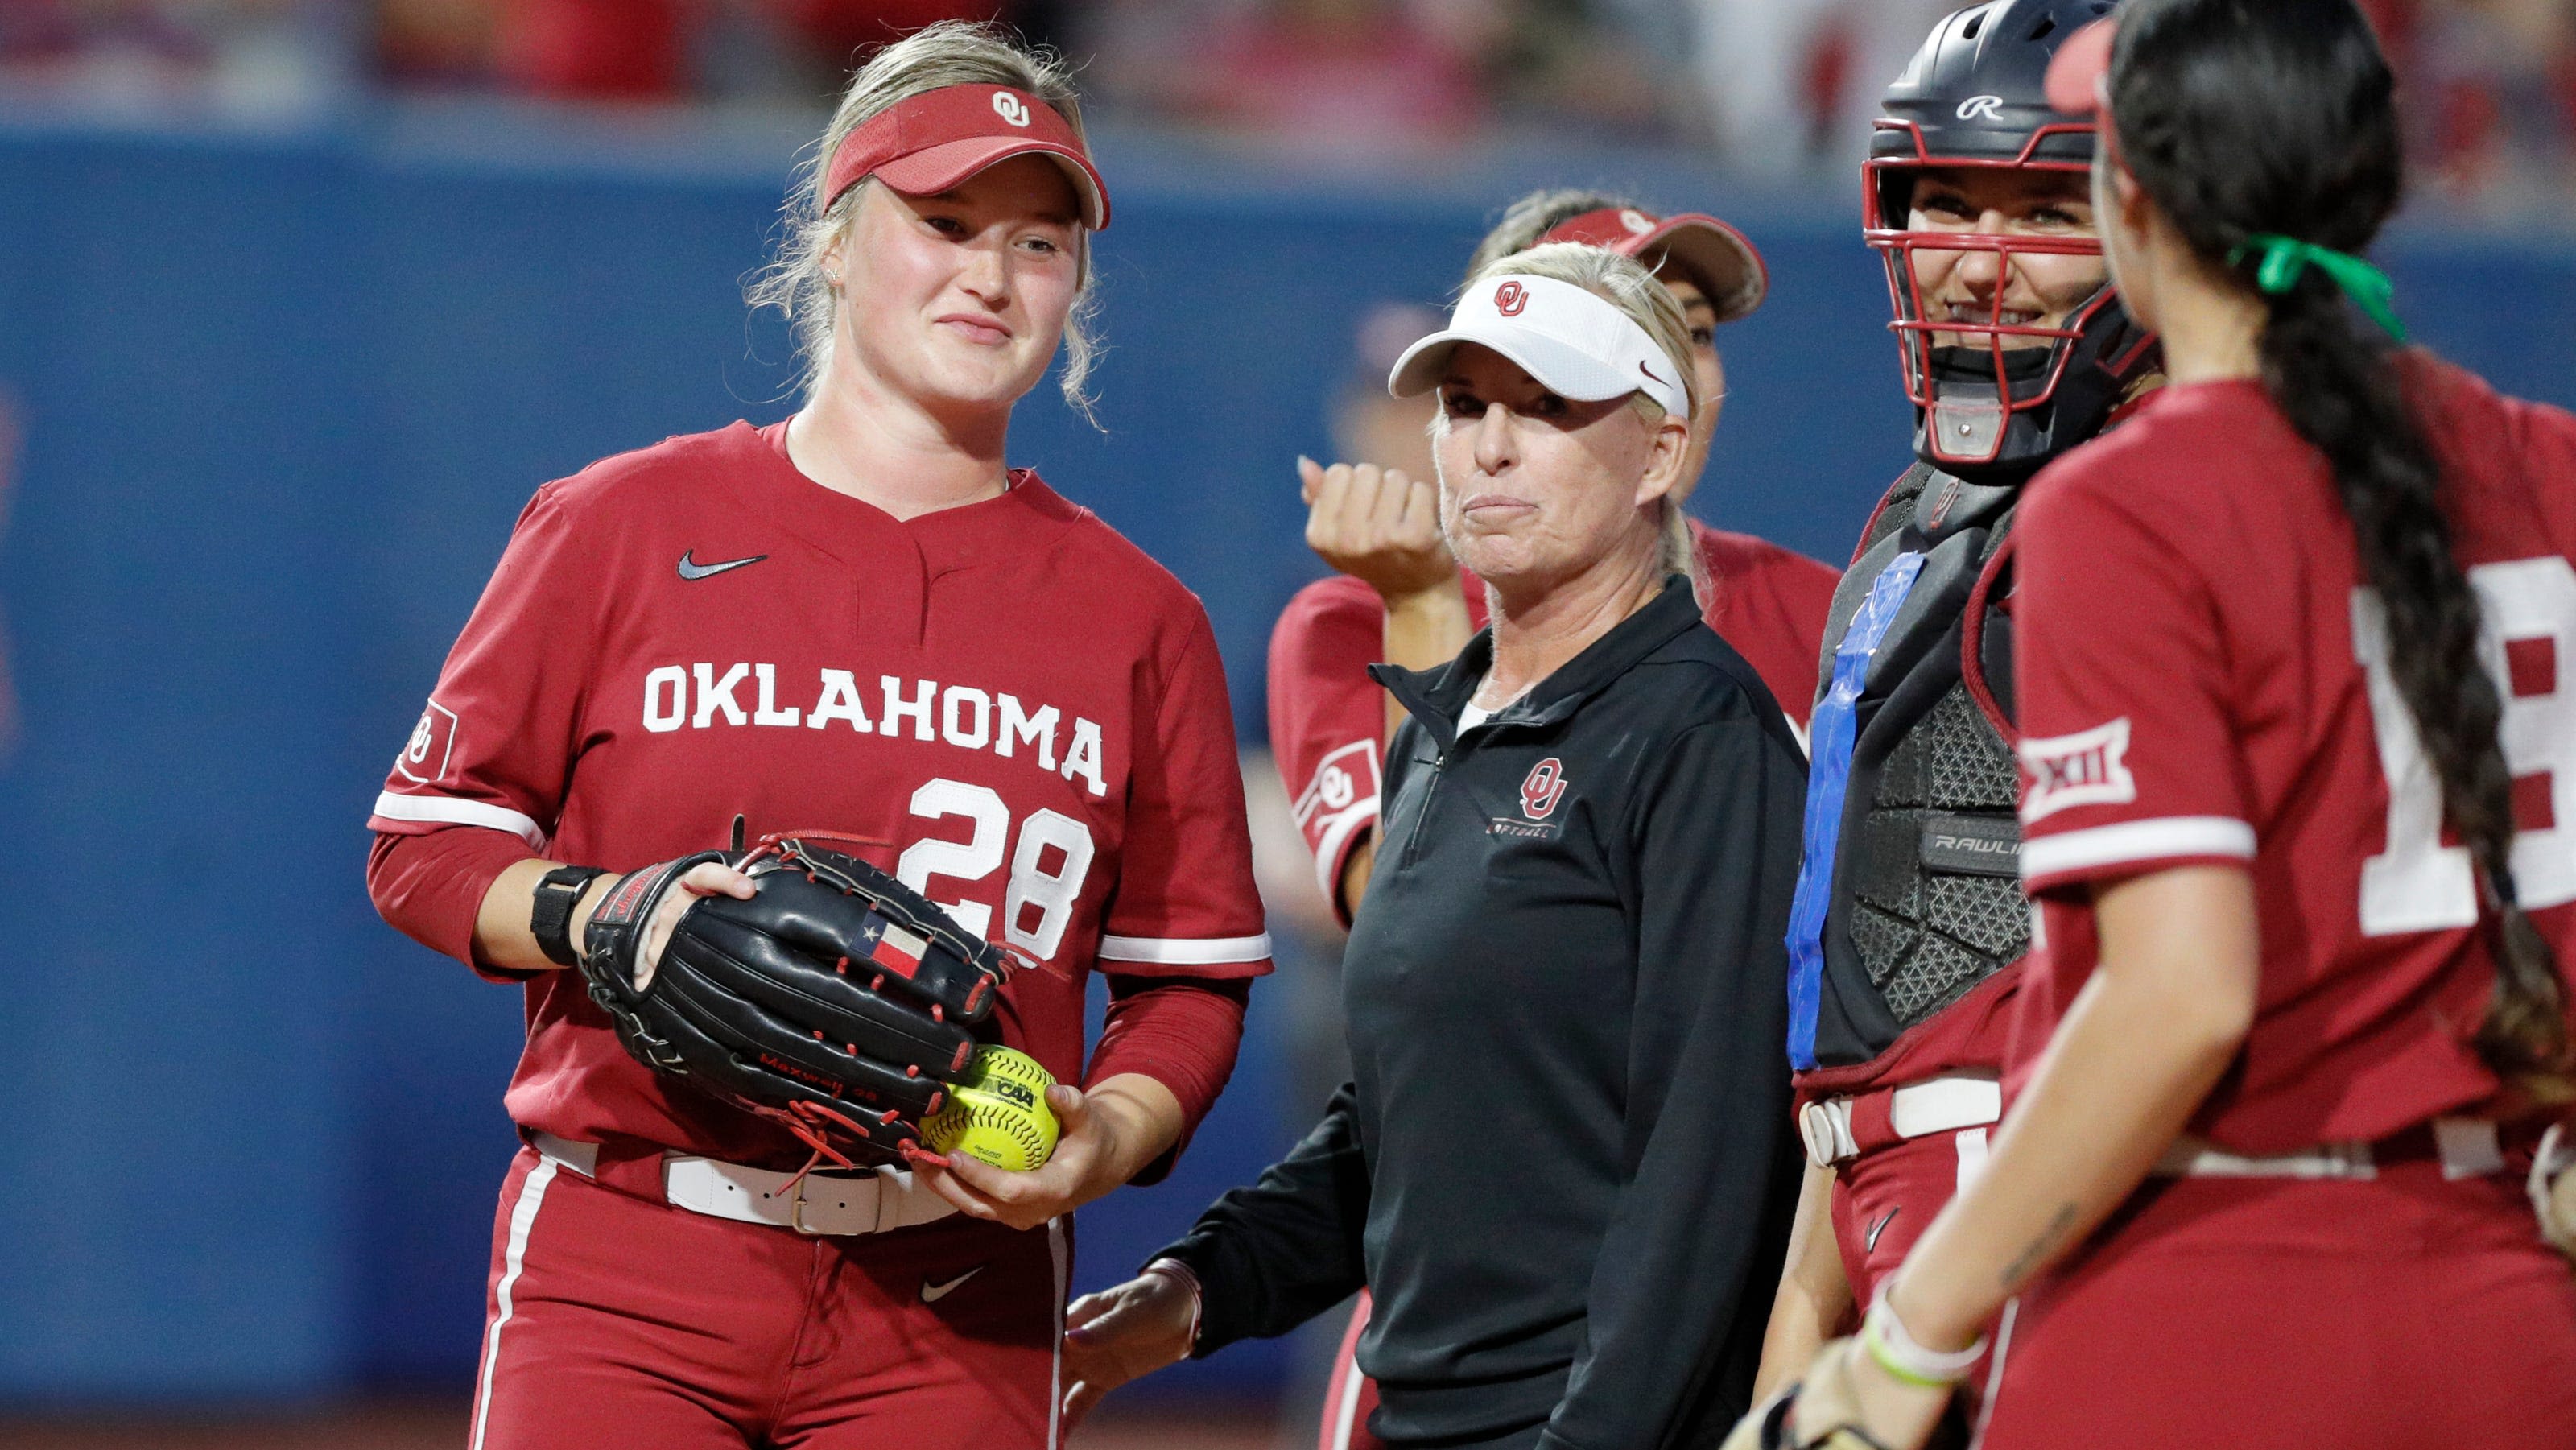 How to watch OU softball vs Cleveland State in Norman Regional of NCAA Tournament